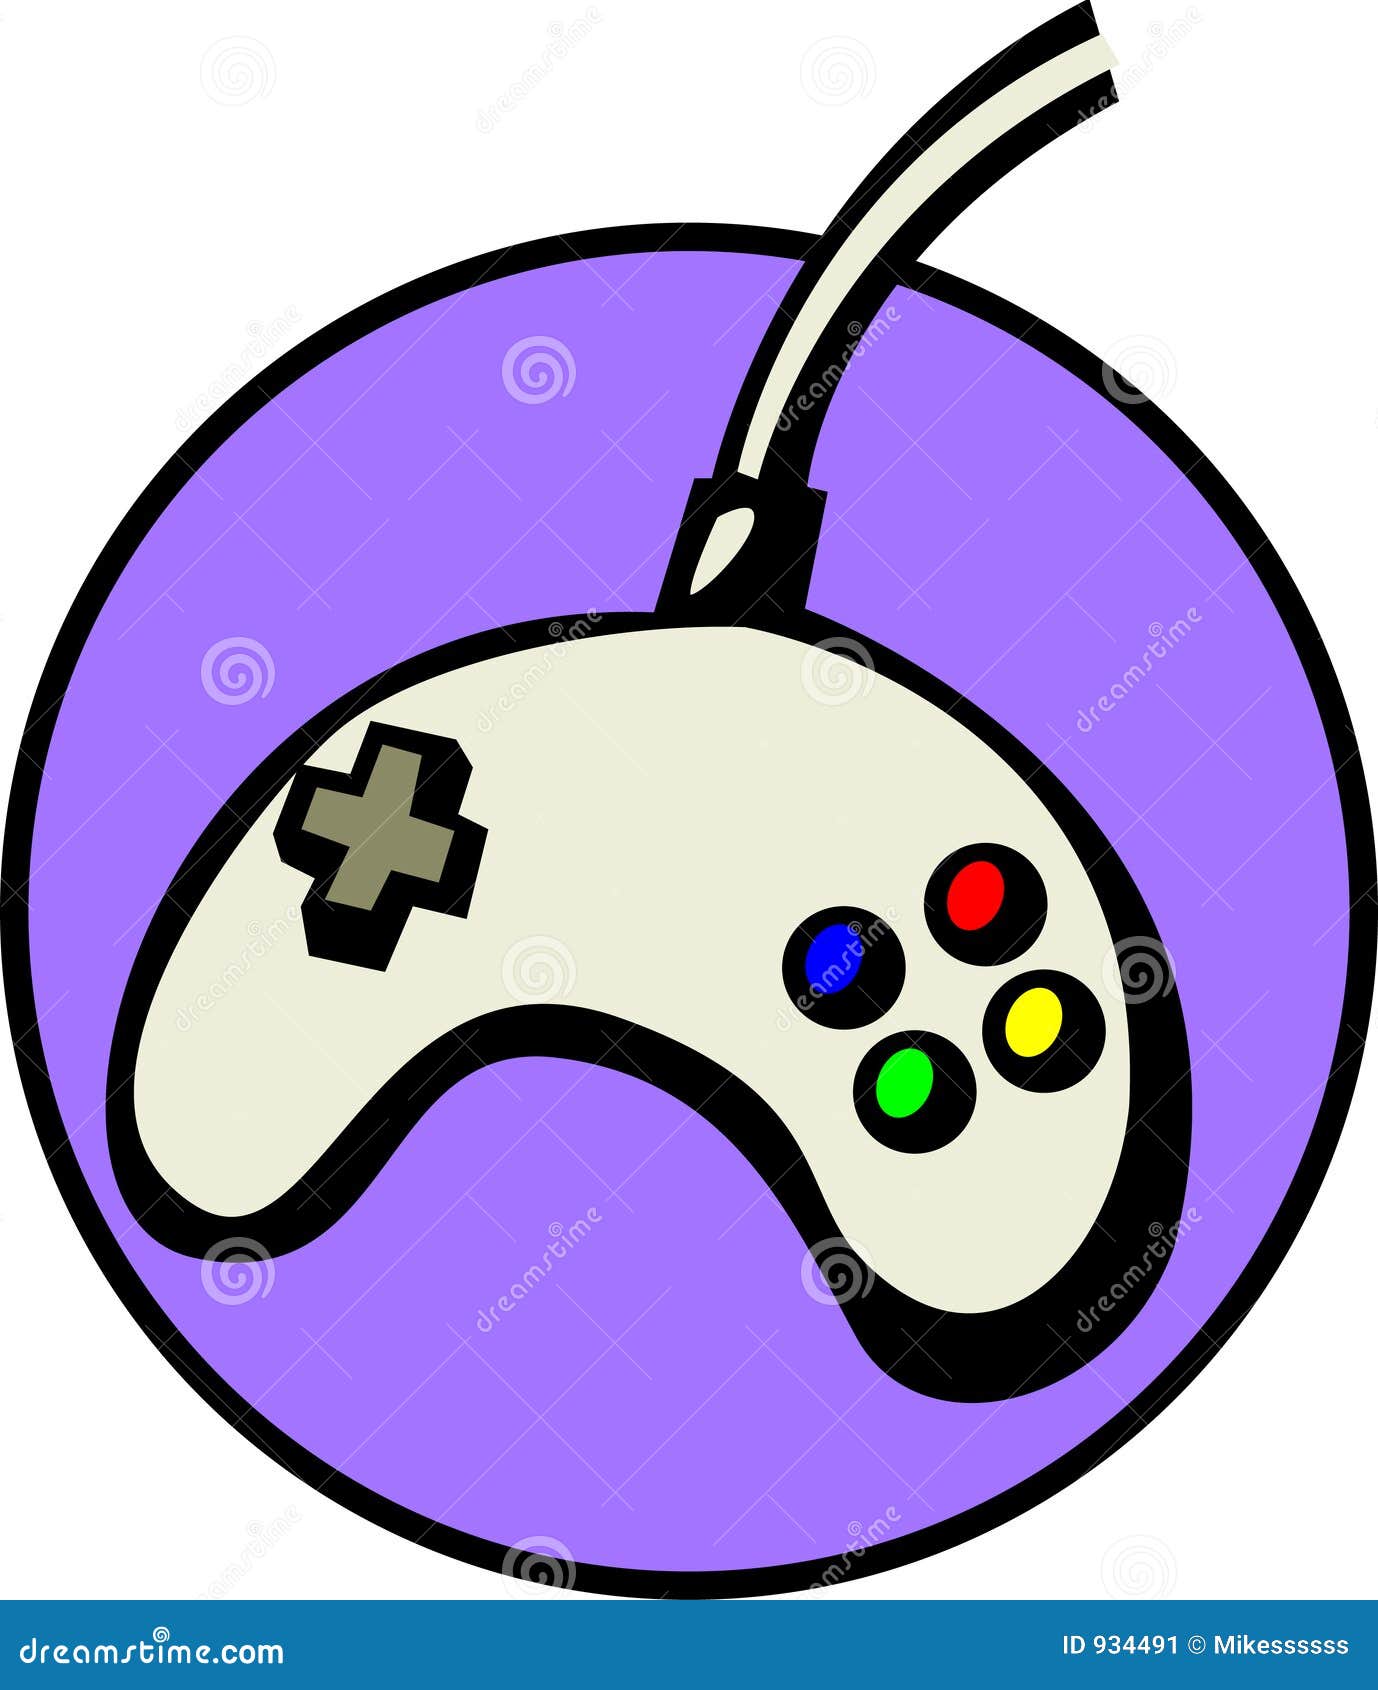 clipart video game - photo #47